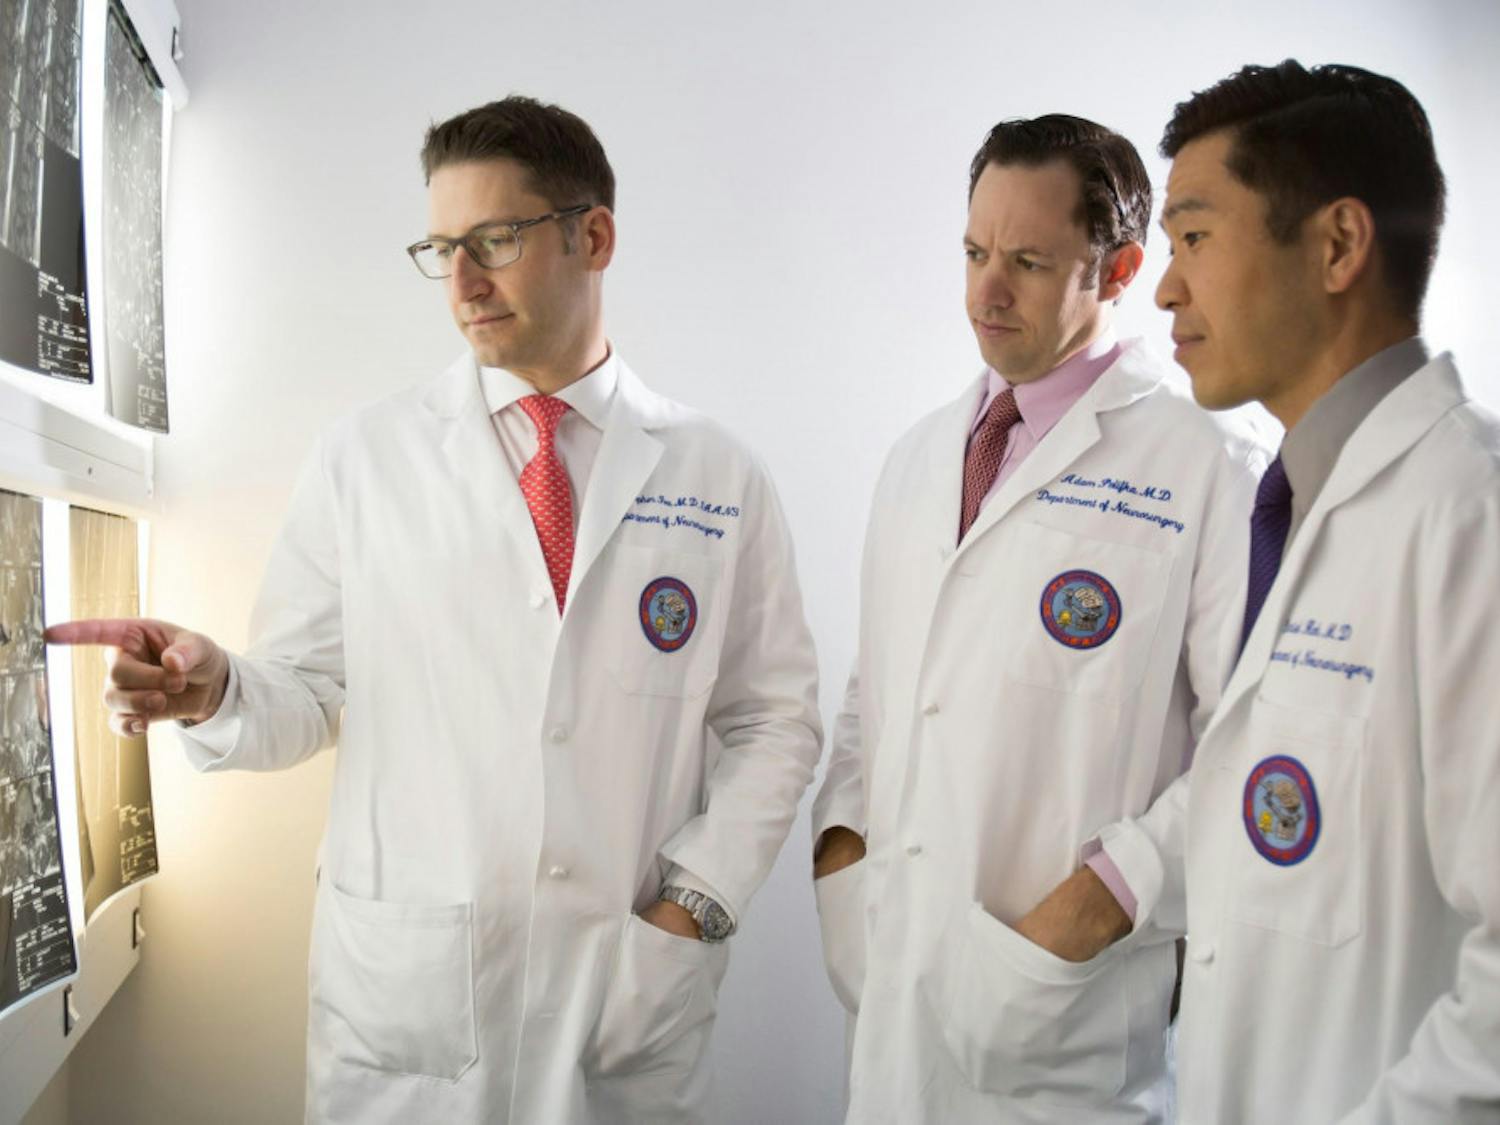 (From left) UF Health neurosurgeons Dr. William Fox, Dr. Adam Polifka and Dr. Daniel Hoh are part of a multidisciplinary team improving care for patients with back and neck pain at the UF Health Comprehensive Spine Center.